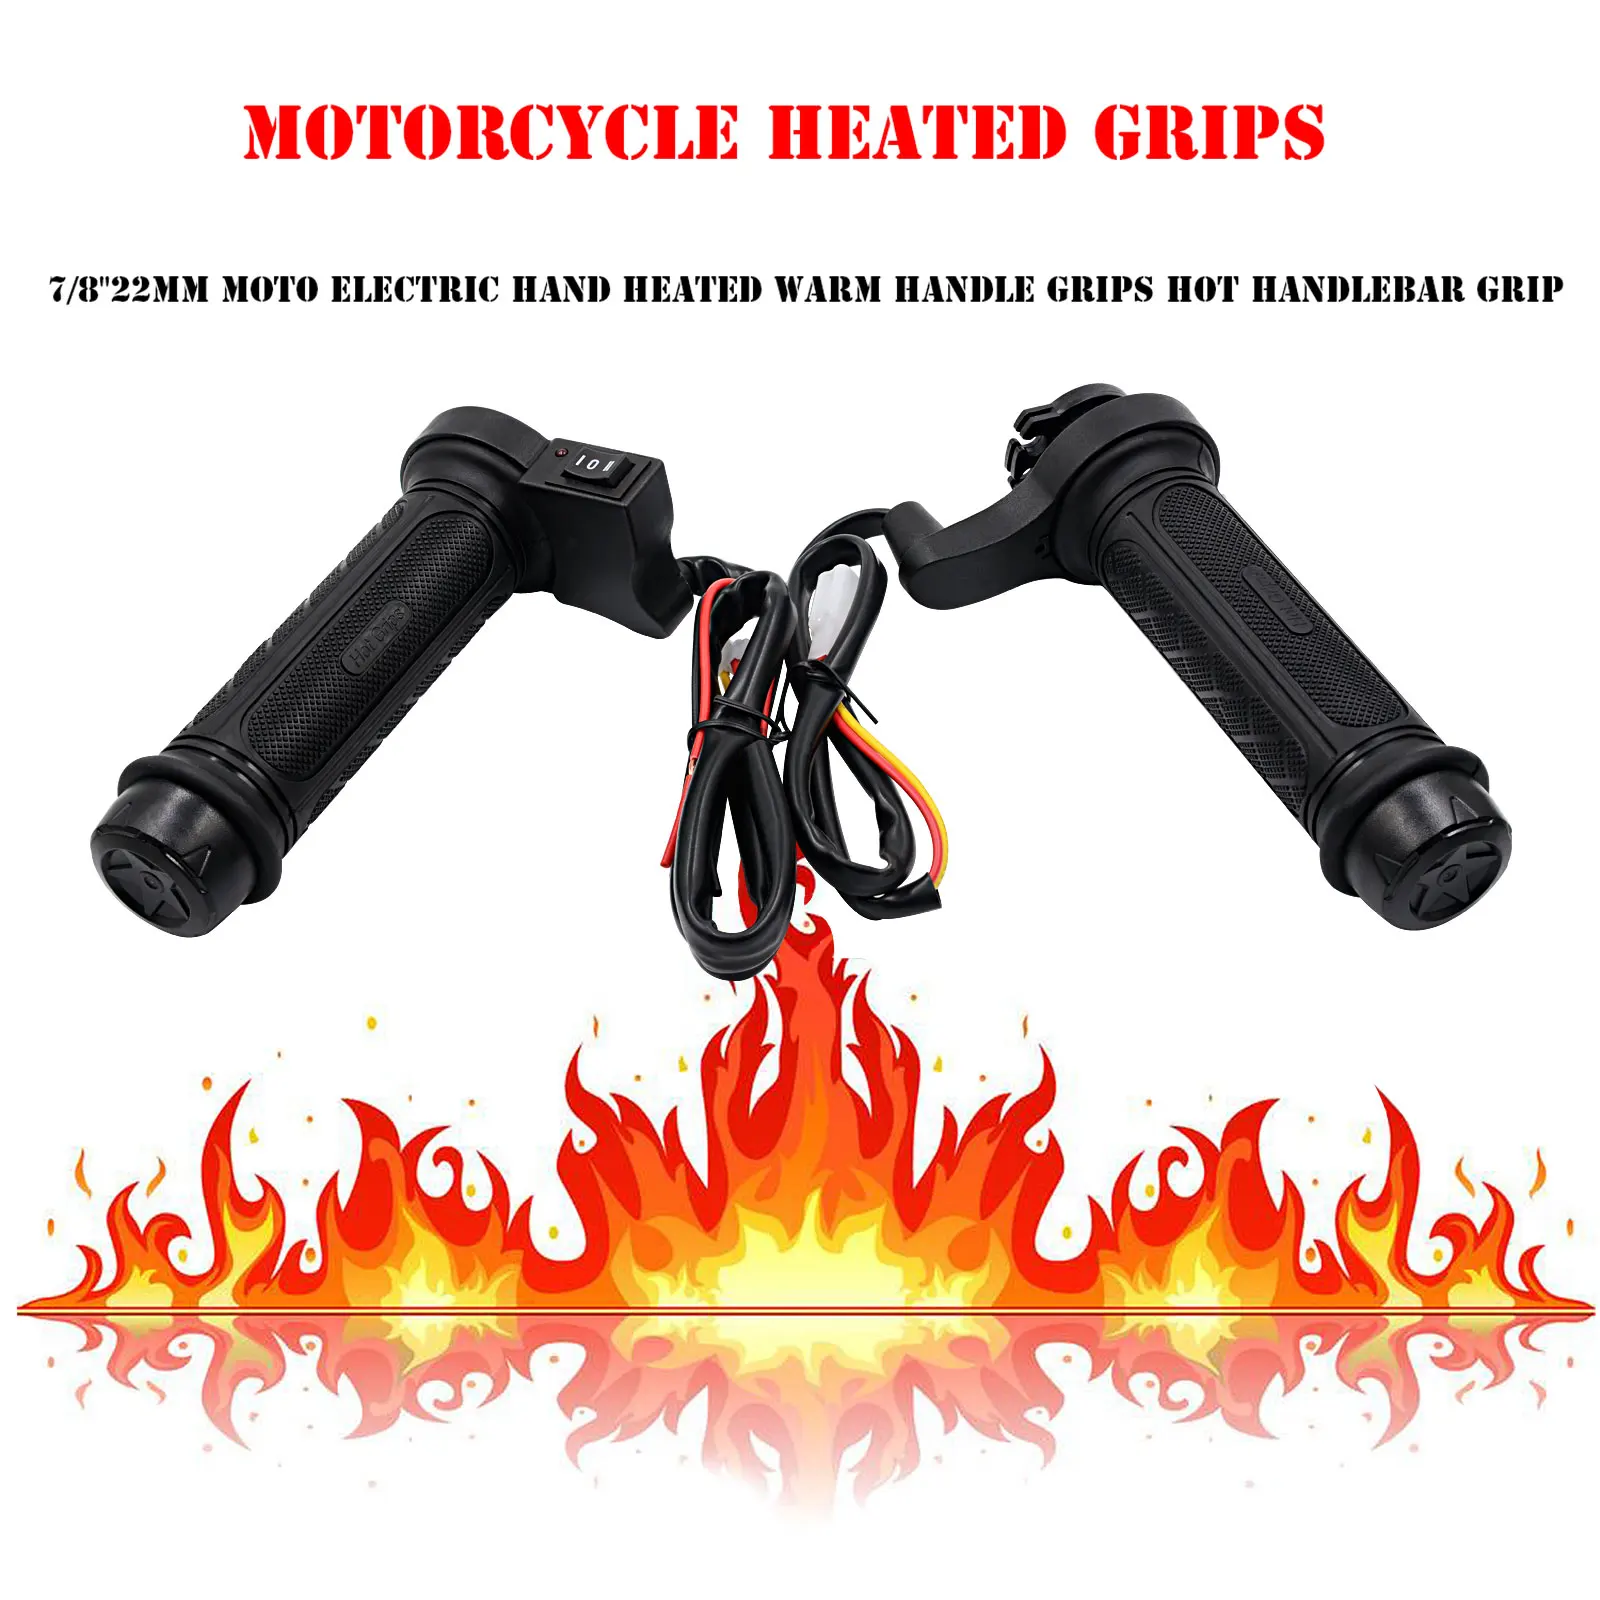 
Molded Winter Electric Heated Handle Grip Motorcycle Hot Handle Grips Warmer 